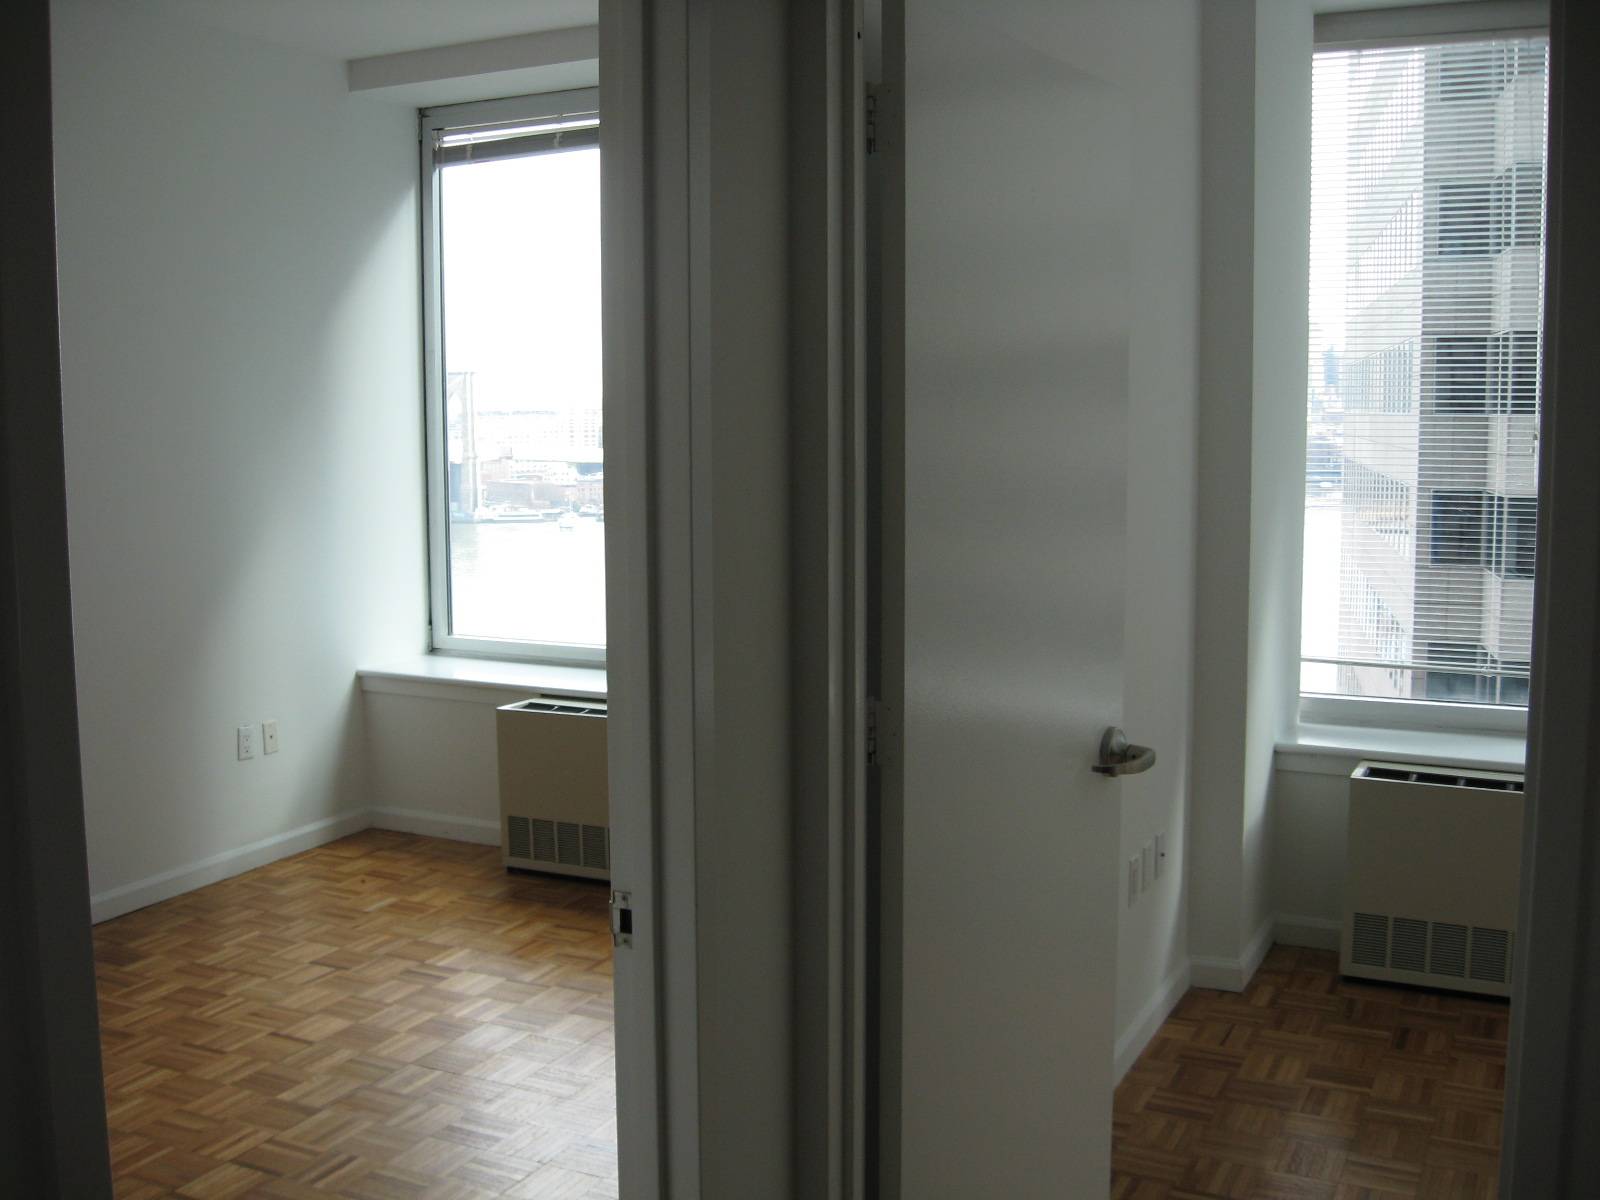 FINANCIAL DISTRICT****TOP OF THE LINE ONE BEDROOM/ONE BATH****VIEWS OF THE EAST RIVER AND BRIDGES